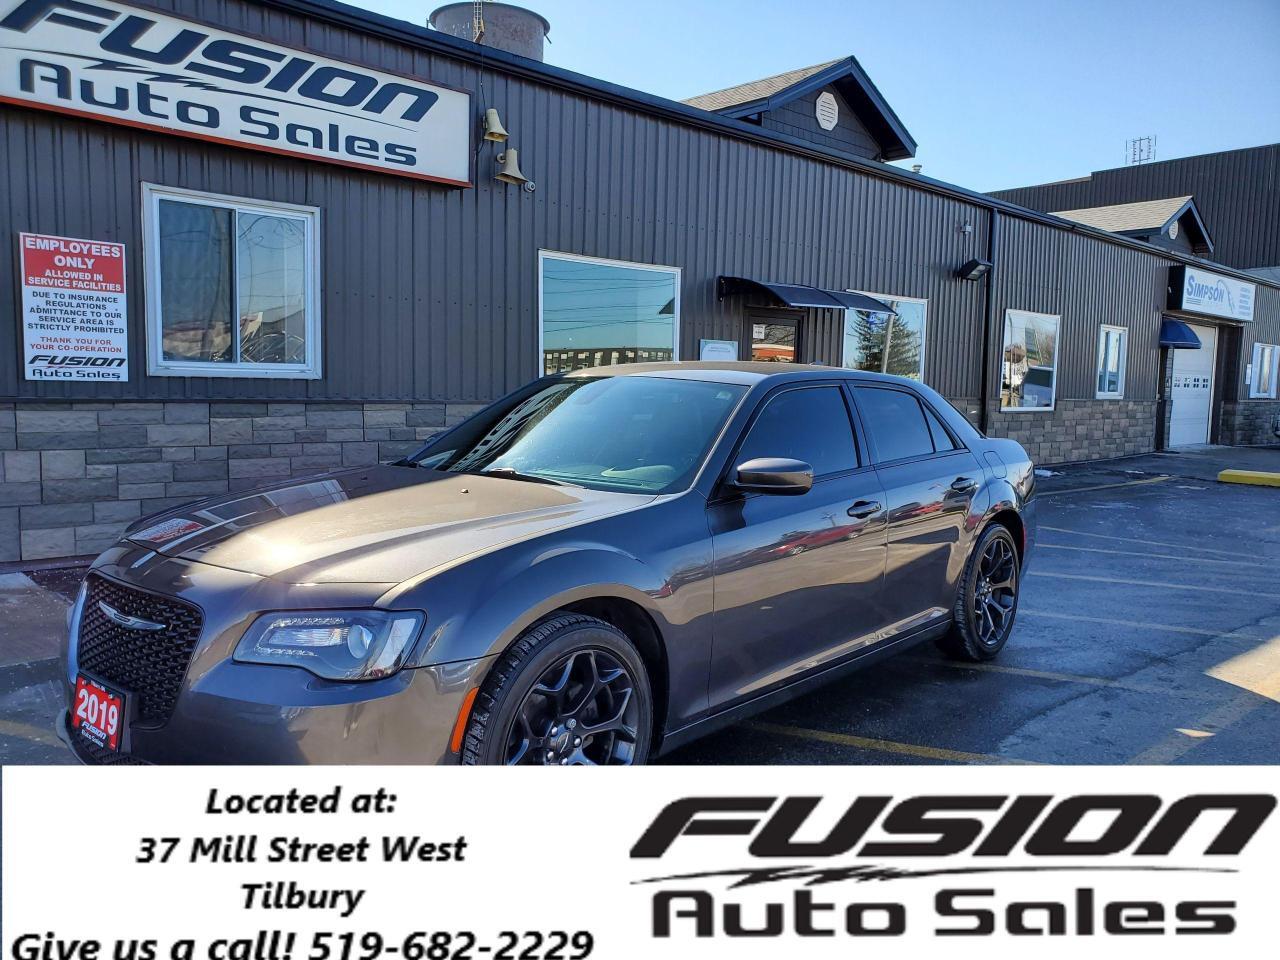 2019 Chrysler 300 300S-NO HST TO A MAX OF $2000 LTD TIME ONLY